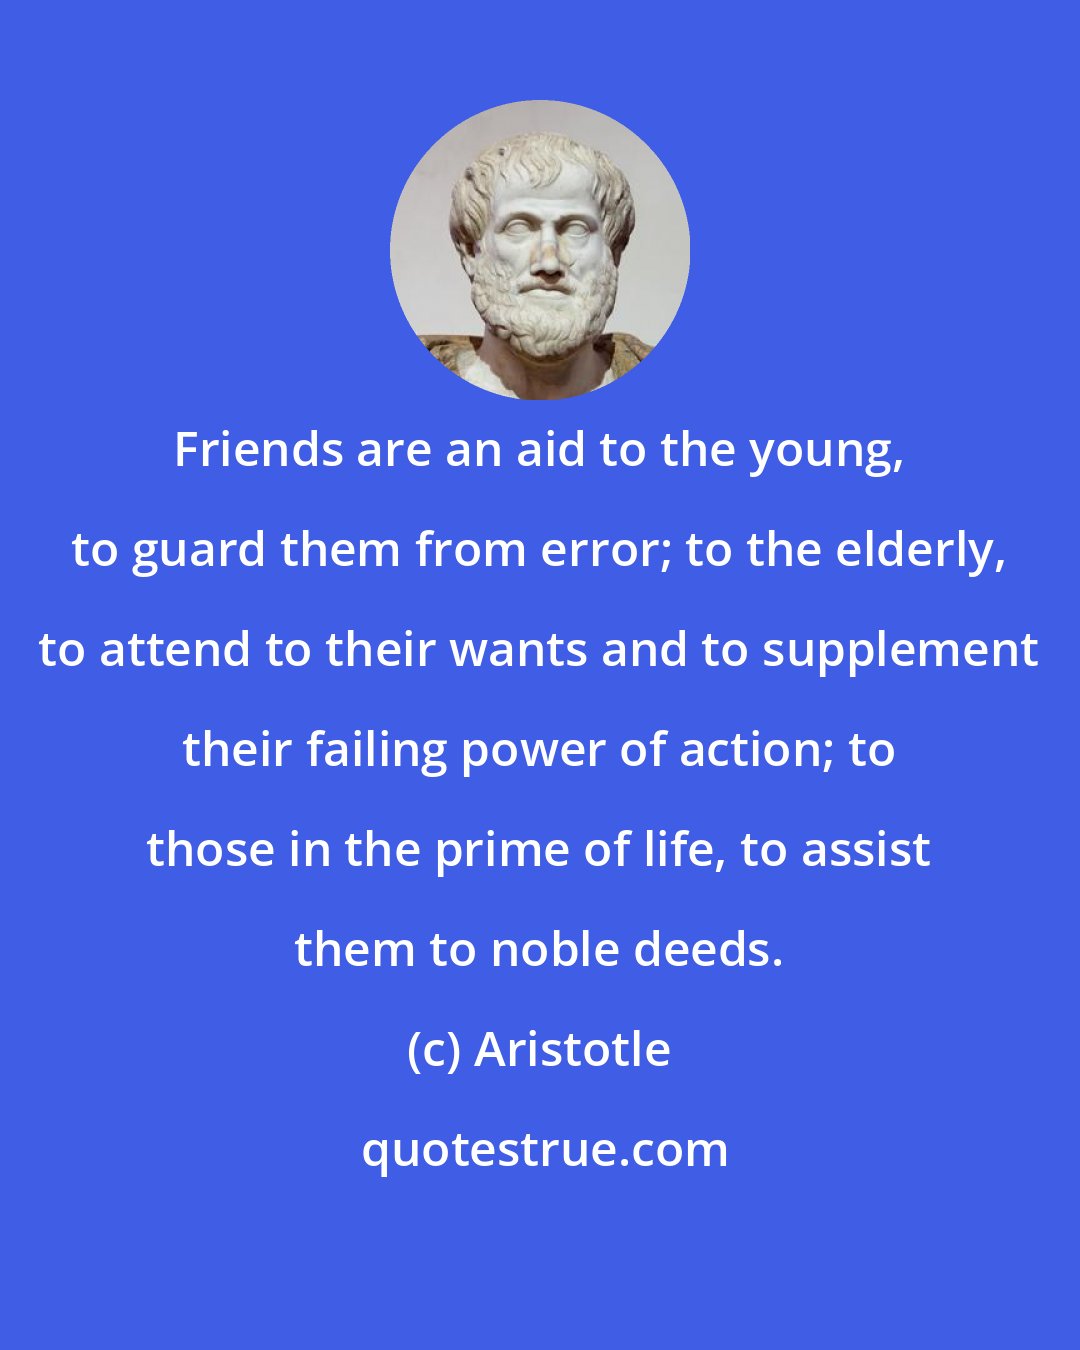 Aristotle: Friends are an aid to the young, to guard them from error; to the elderly, to attend to their wants and to supplement their failing power of action; to those in the prime of life, to assist them to noble deeds.